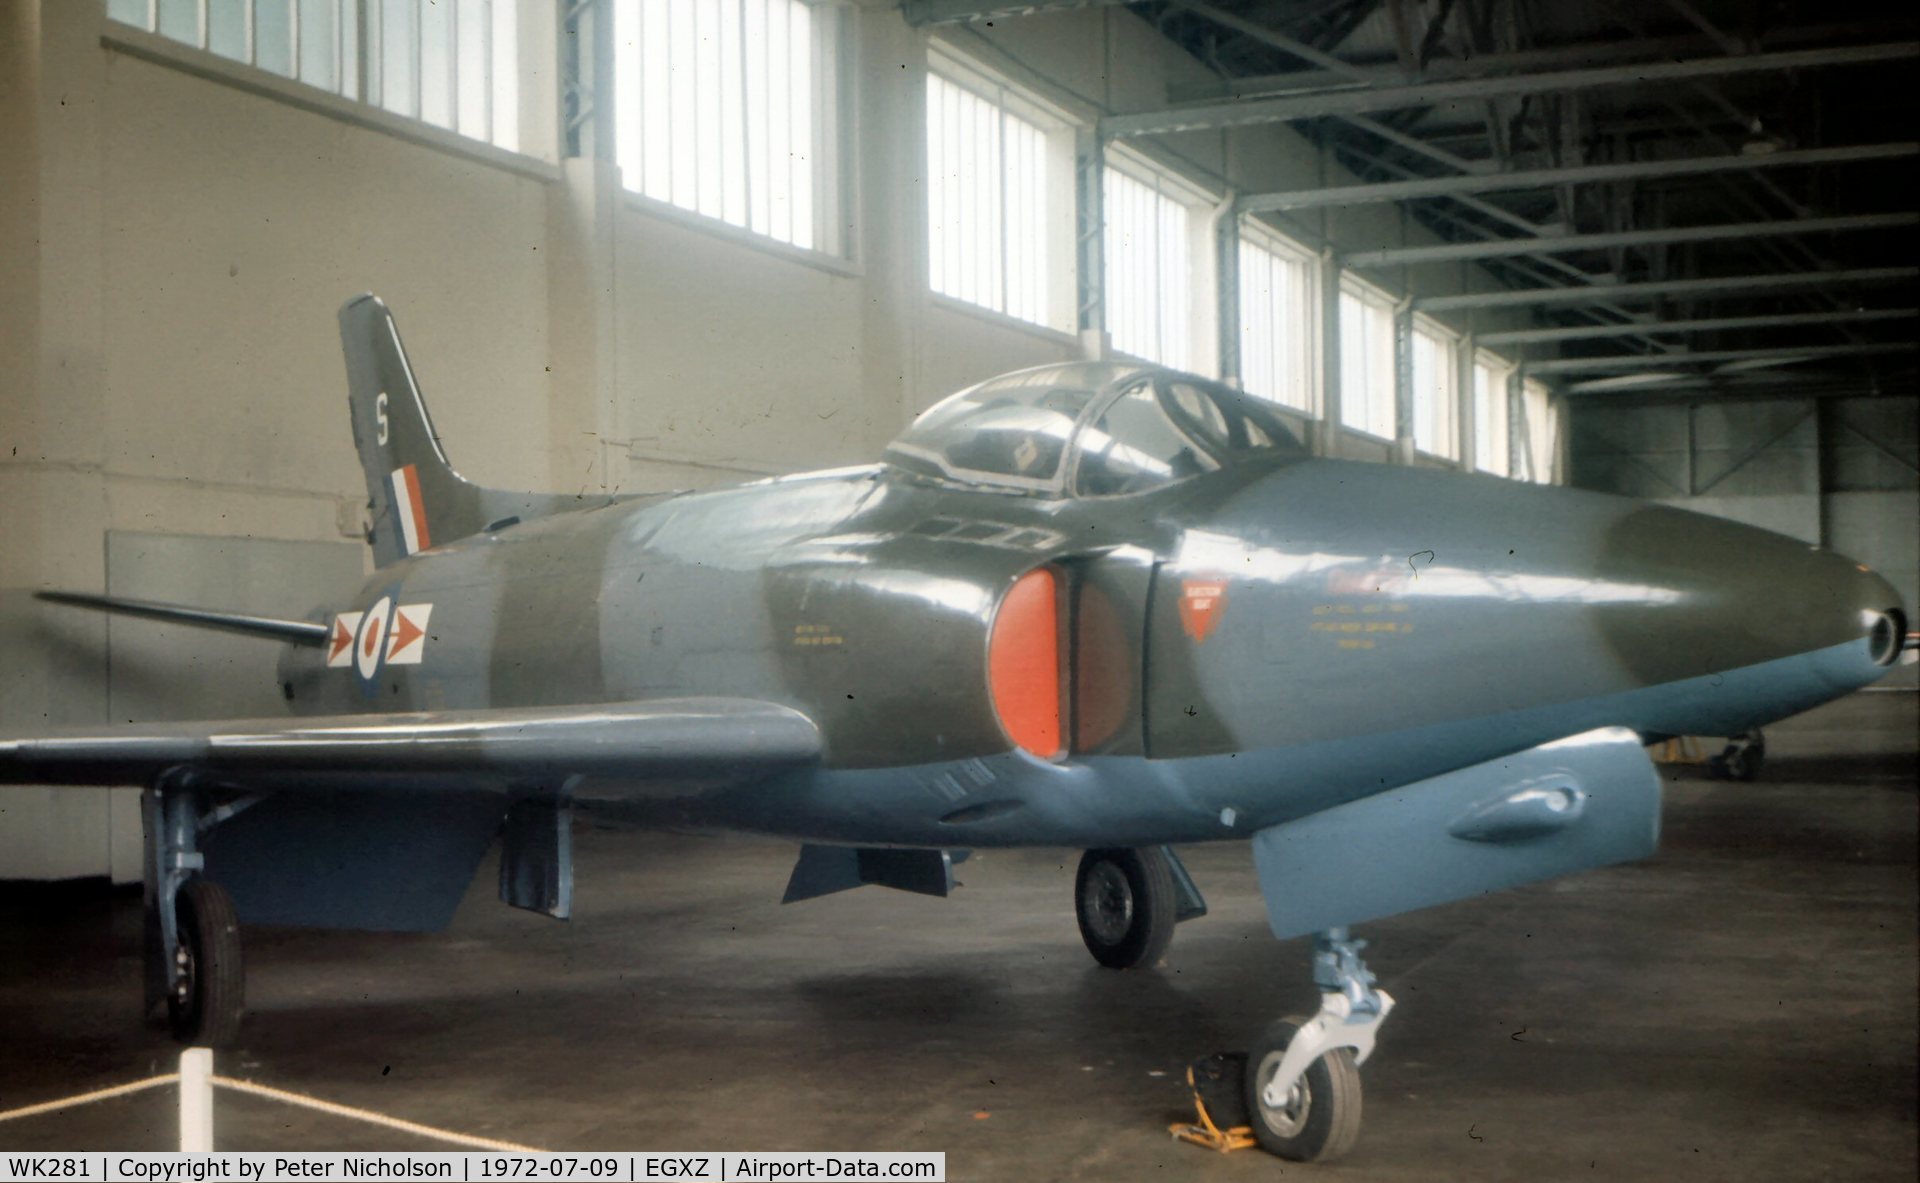 WK281, 1956 Supermarine Swift FR.5 C/N Not found WK281, Swift FR.5 with RAF maintainance serial 7712M hangered at Topcliffe on the 1972 Open Day and now preserved in Tangmere Museum, West Sussex.